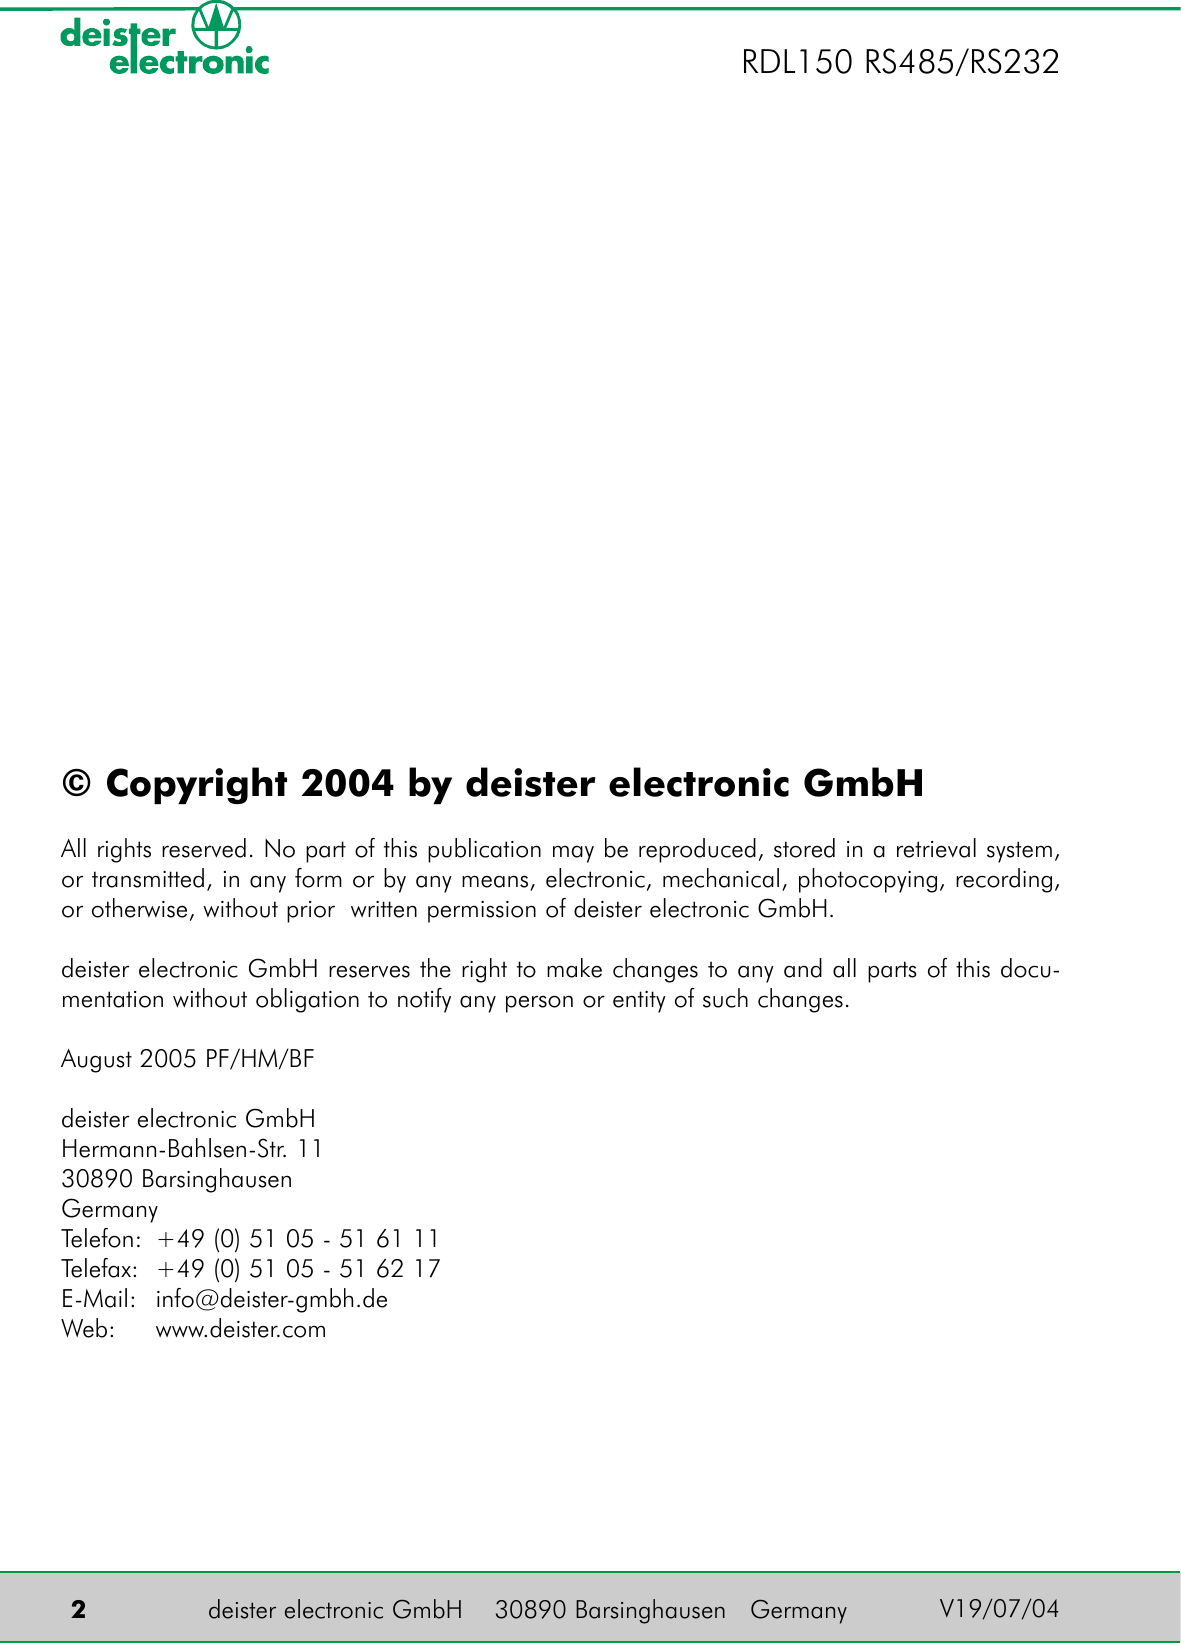 deister electronic GmbH    30890 Barsinghausen   Germany  2RDL150 RS485/RS232V19/07/04© Copyright 2004 by deister electronic GmbHAll rights reserved. No part of this publication may be reproduced, stored in a retrieval system,or transmitted, in any form or by any means, electronic, mechanical, photocopying, recording,or otherwise, without prior  written permission of deister electronic GmbH.deister electronic GmbH reserves the right to make changes to any and all parts of this docu-mentation without obligation to notify any person or entity of such changes.August 2005 PF/HM/BFdeister electronic GmbHHermann-Bahlsen-Str. 11 30890 BarsinghausenGermanyTelefon: +49 (0) 51 05 - 51 61 11Telefax: +49 (0) 51 05 - 51 62 17E-Mail: info@deister-gmbh.deWeb: www.deister.com